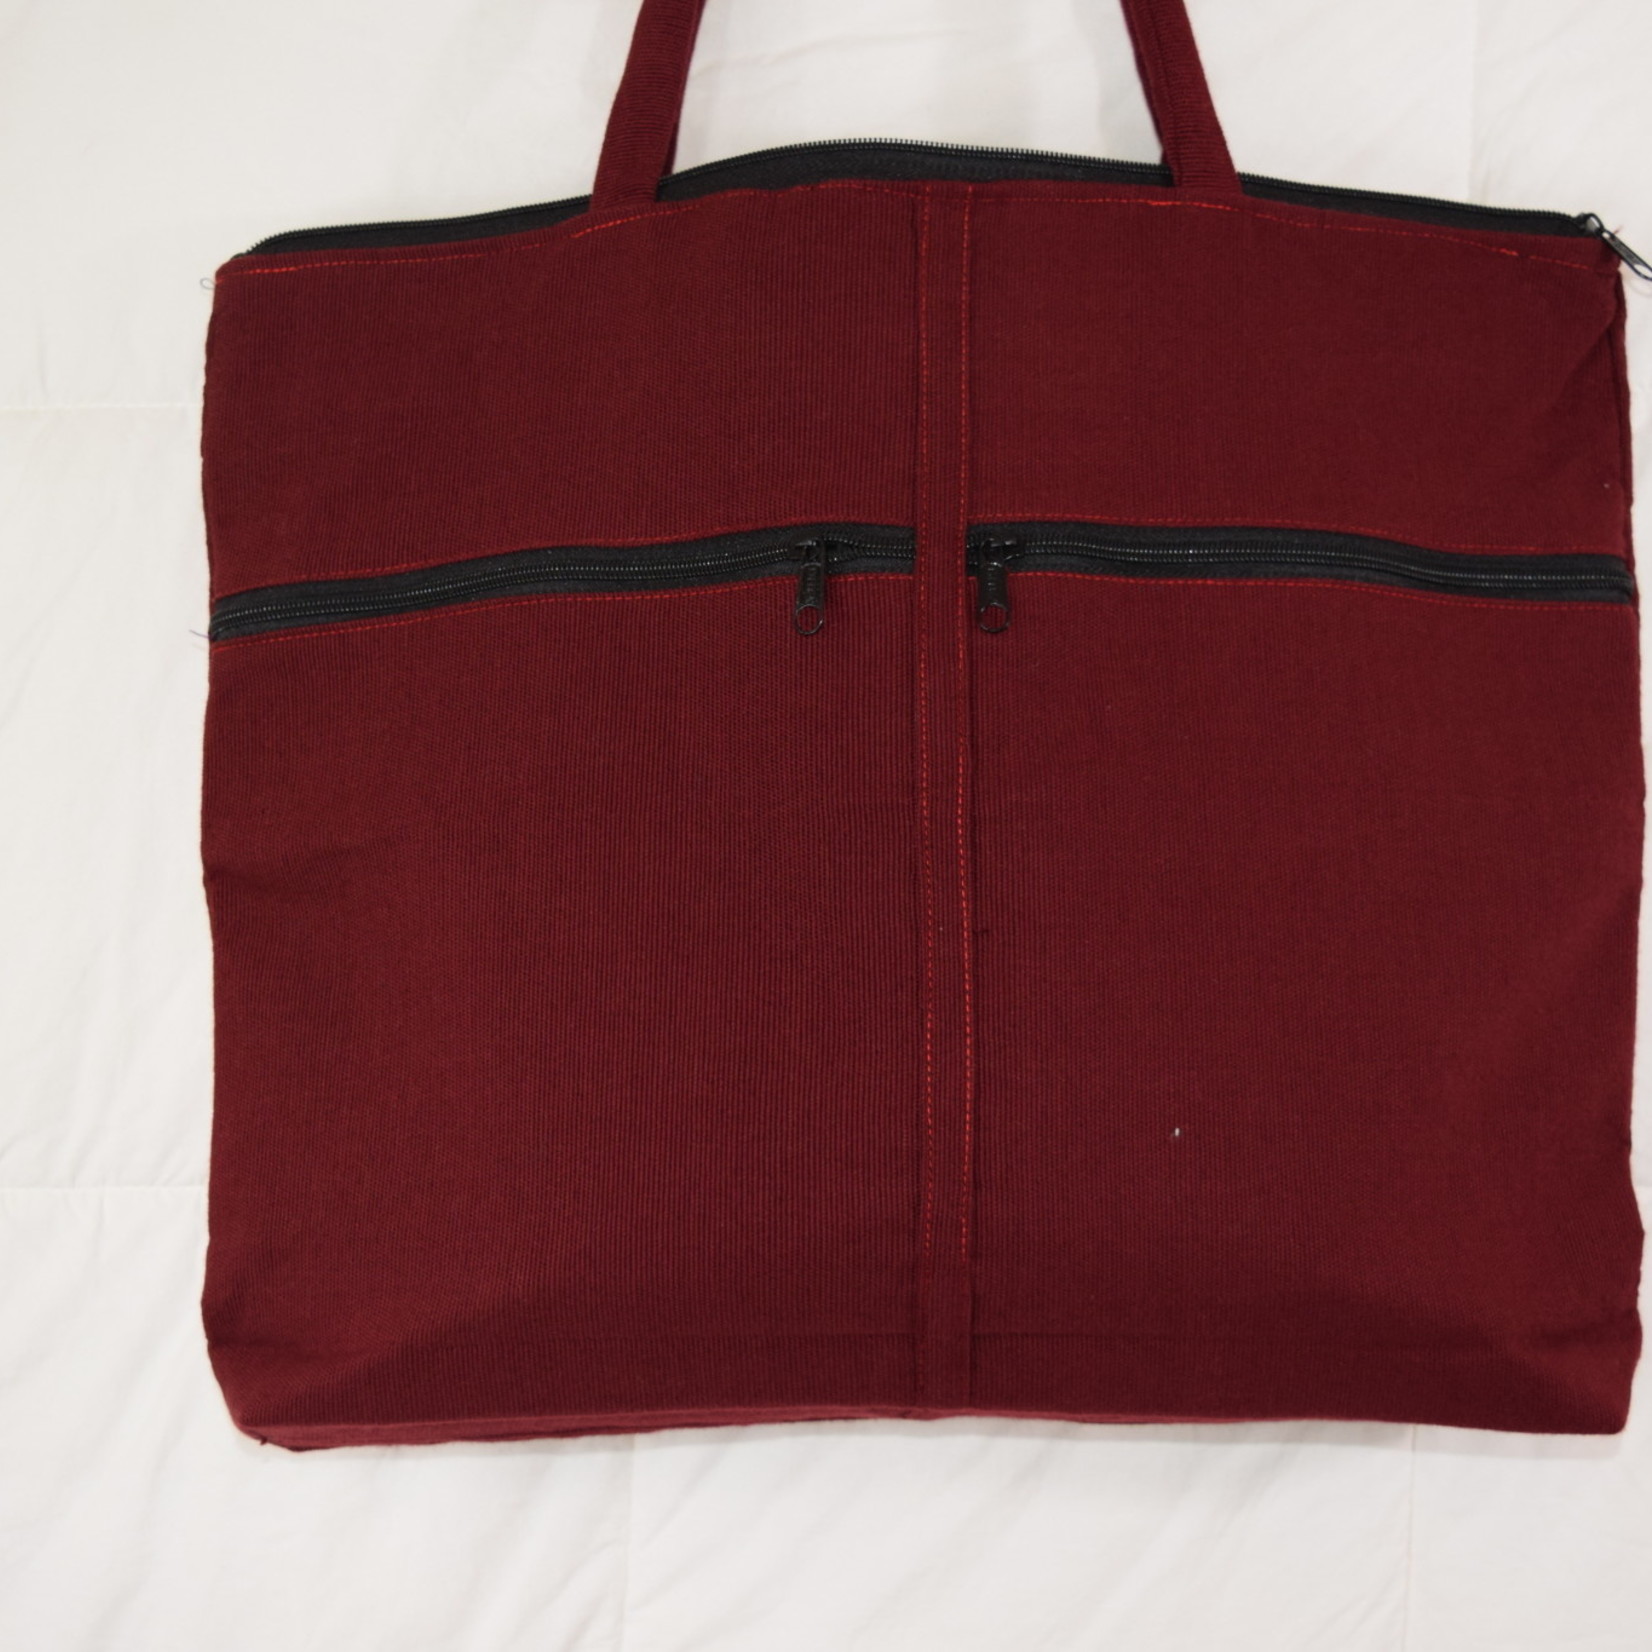 Maroon Floral Embroidered Tote